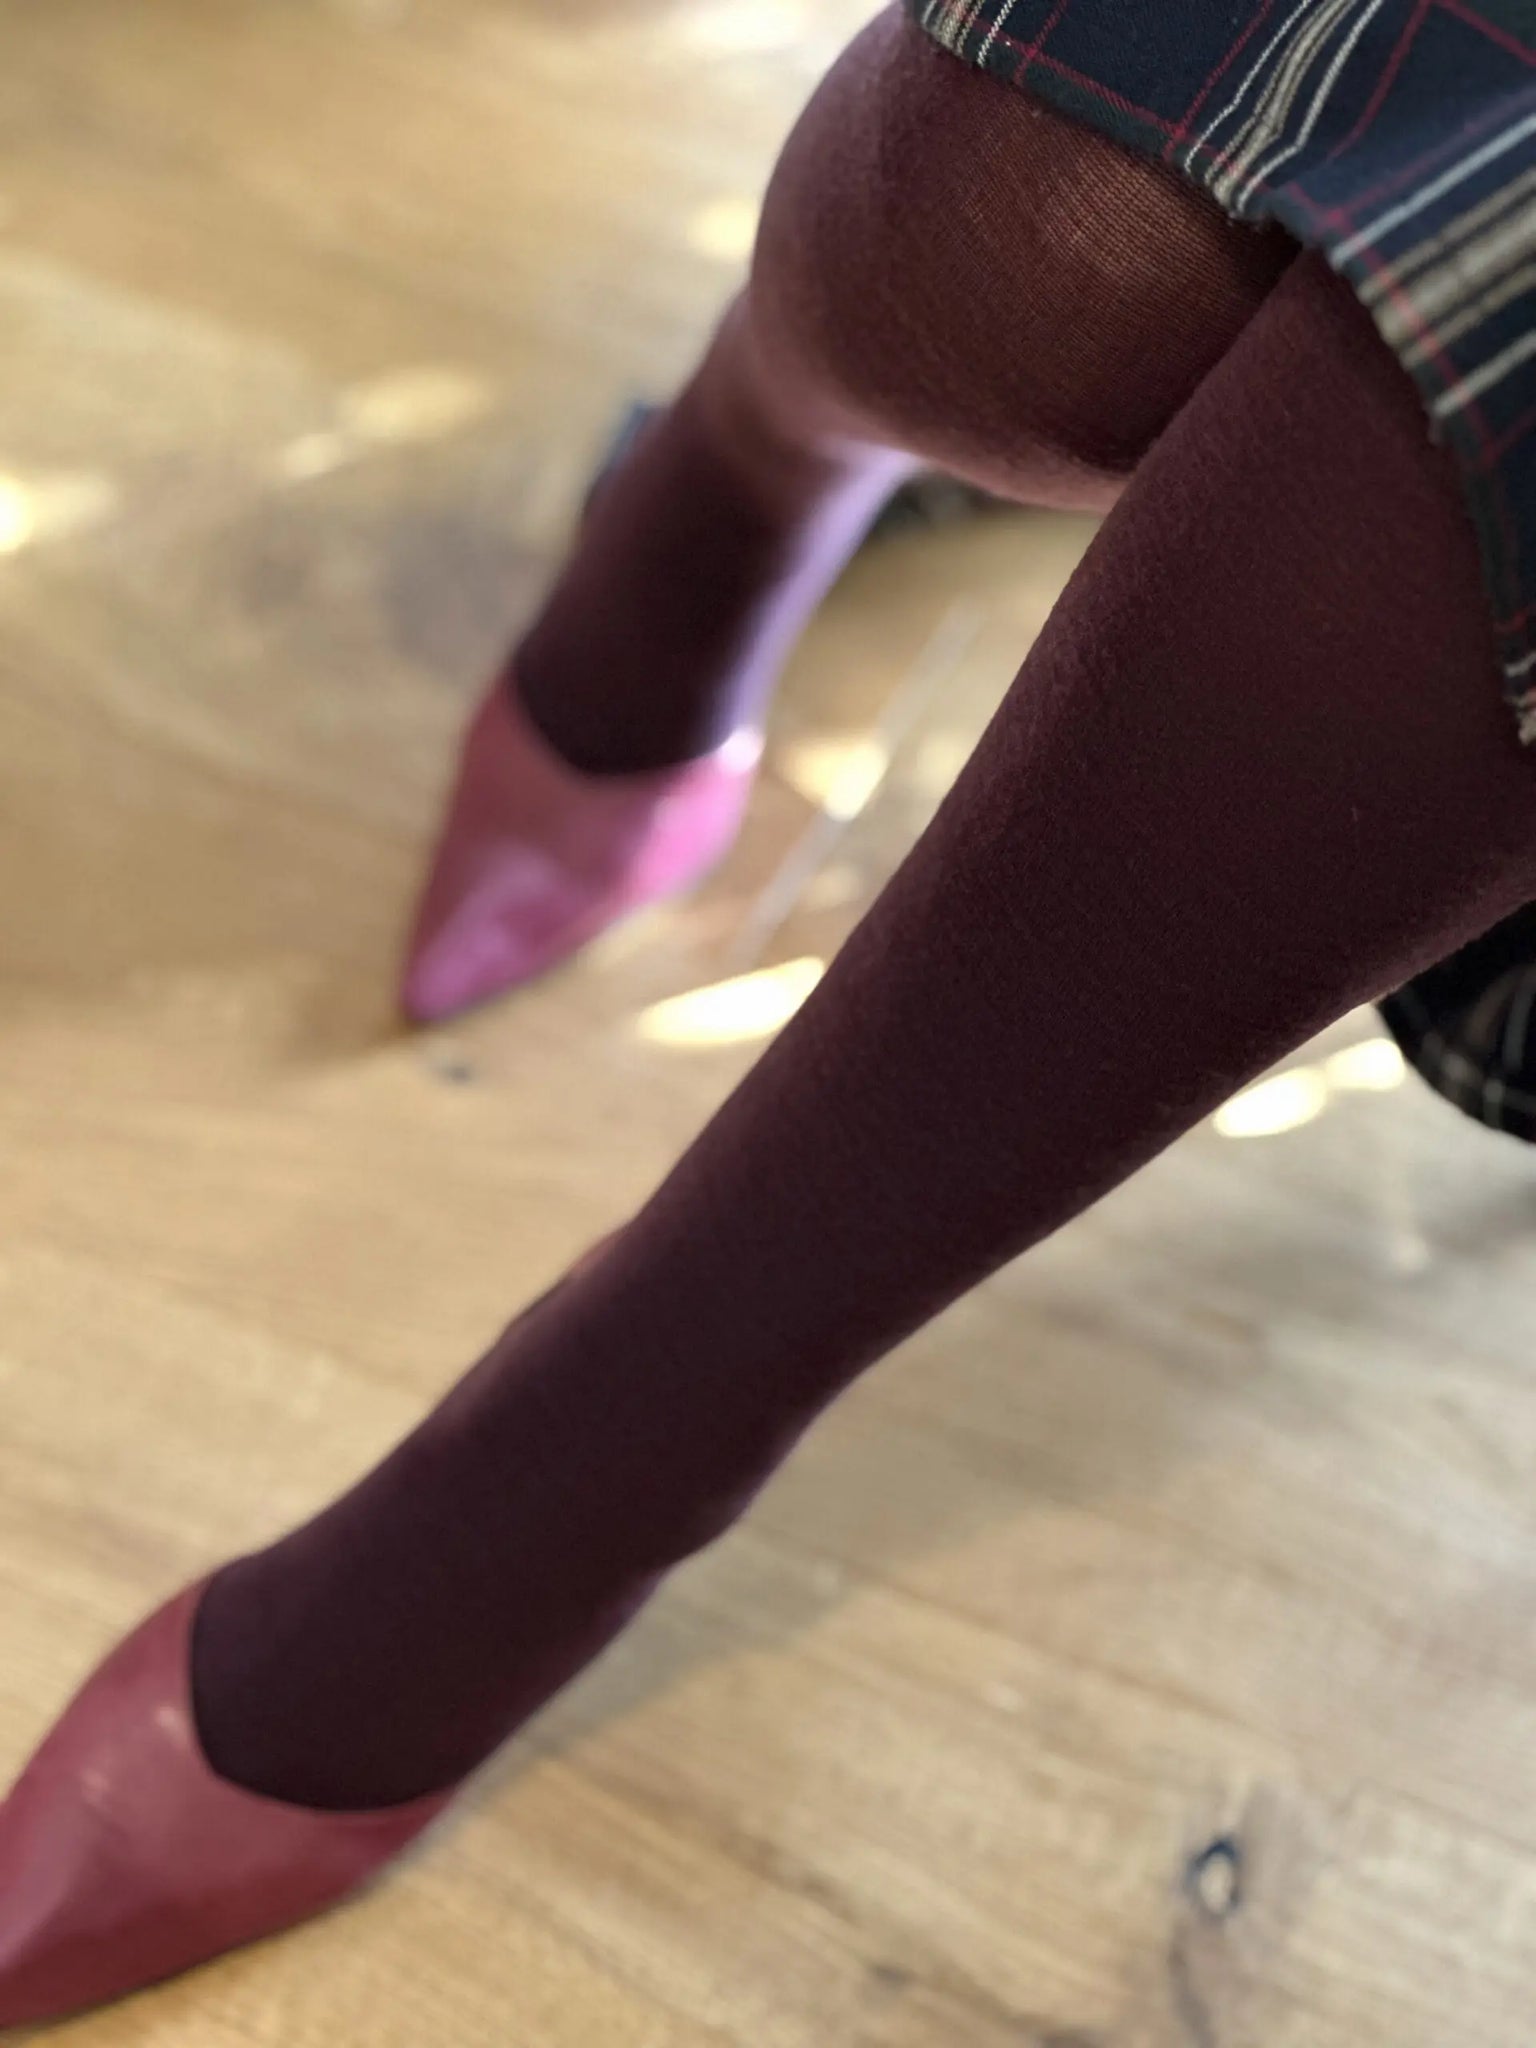 Luxe Merino Tights - Mulberry